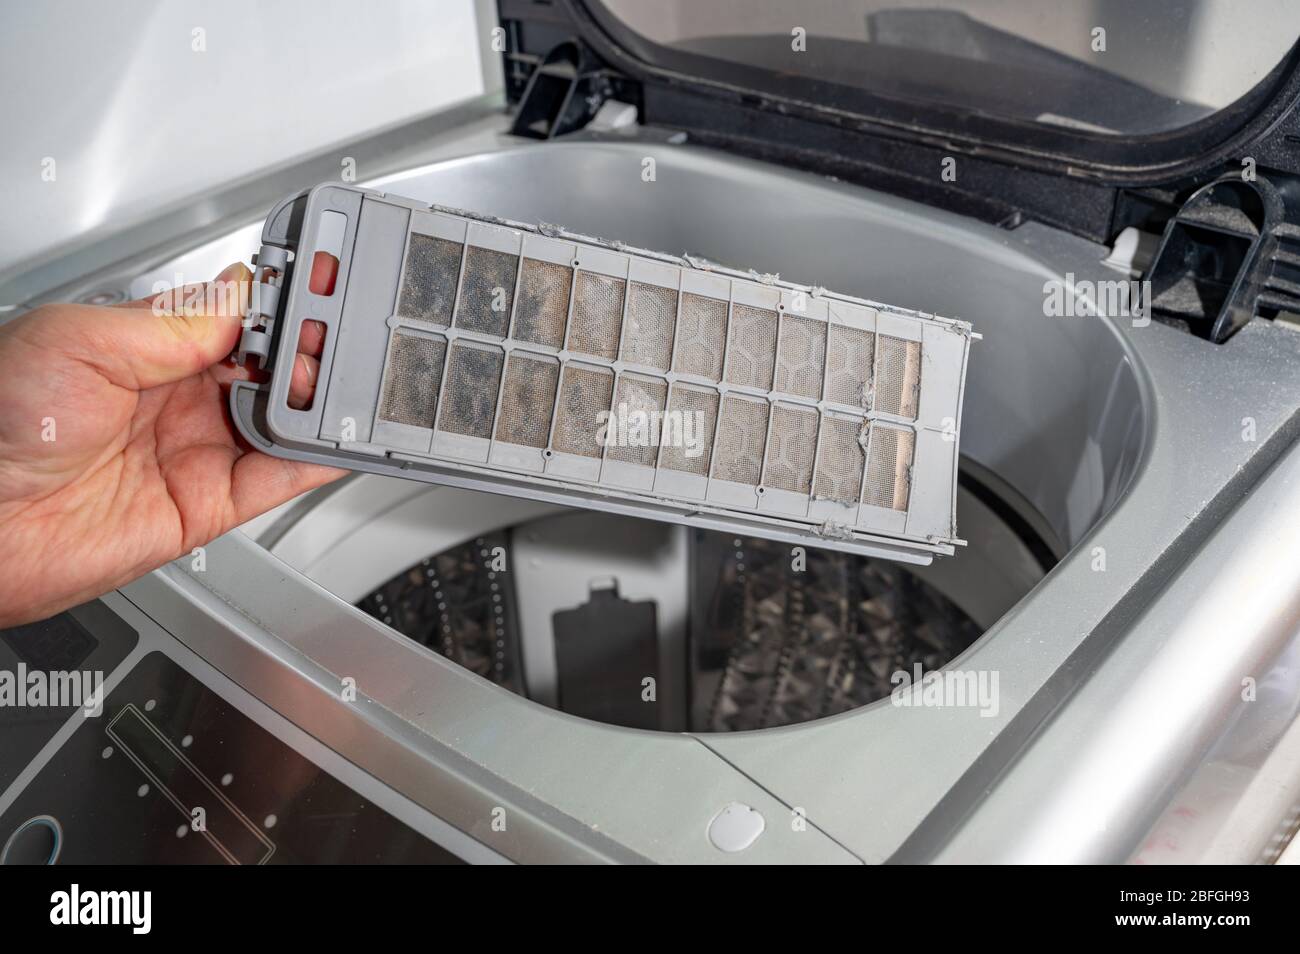 https://c8.alamy.com/comp/2BFGH93/dust-and-dirt-trapped-by-the-washing-machine-filter-2BFGH93.jpg